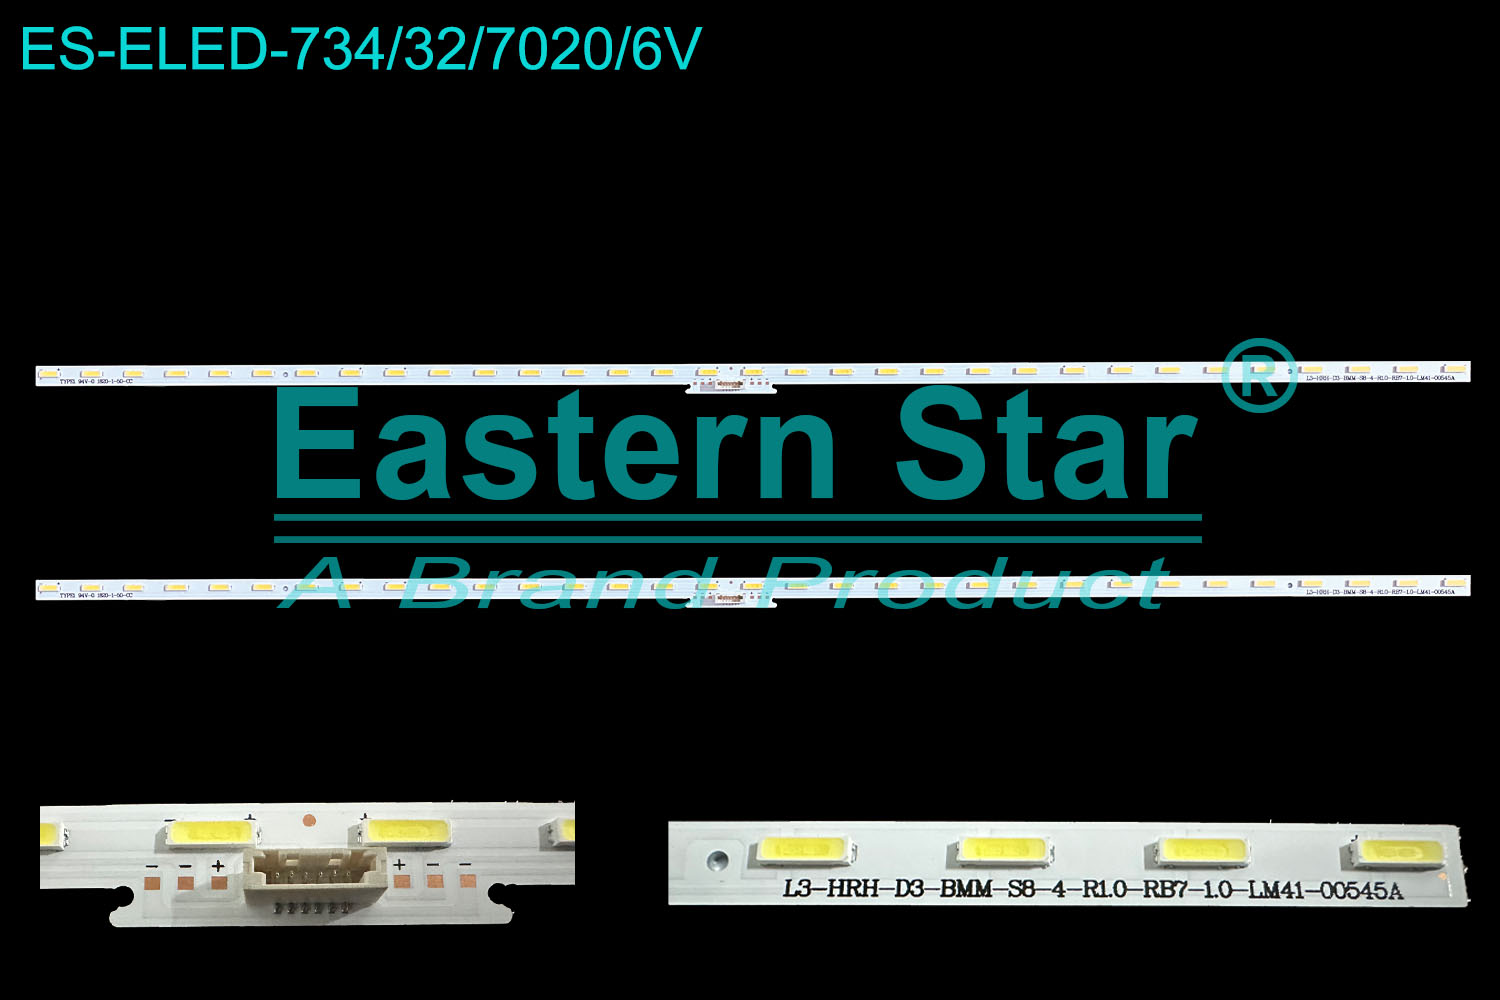 ES-ELED-734 ELED/EDGE TV backlight use for 43'' Sony  KD-43X8500F L3-HRH-D3-BMM-S8-4-R1.0-RB7-1.0-LM41-00545A  LED STRIPS(2)